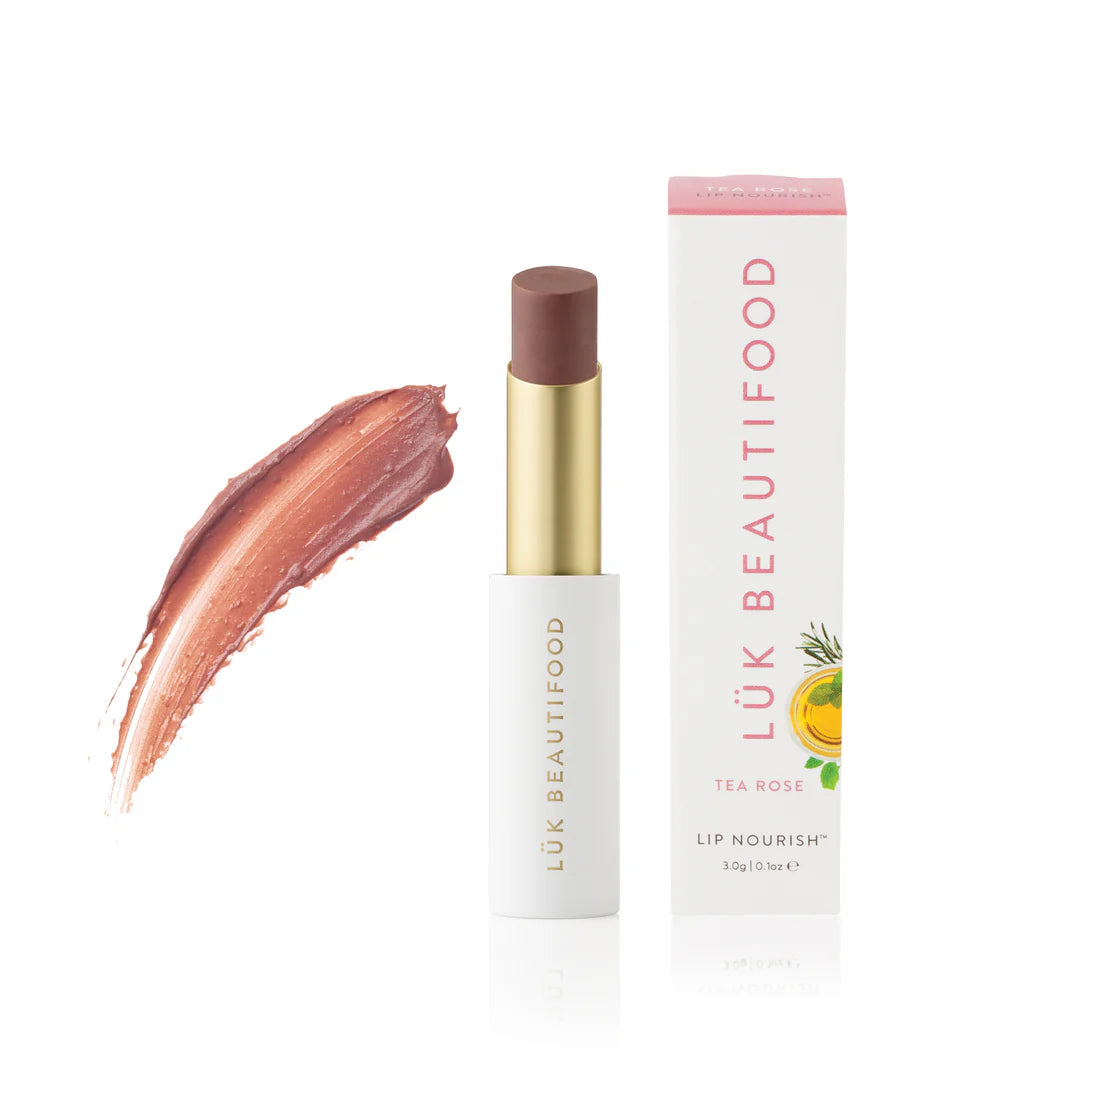 Tea Rose is a wearable neutral with a hint of mauve.  It enhances and evens out natural lip colour.  A universally flattering shade, it has an elegant scent and is deeply hydrating. Makes lips the best version of themselves.  A Luk Beautifood bestseller.